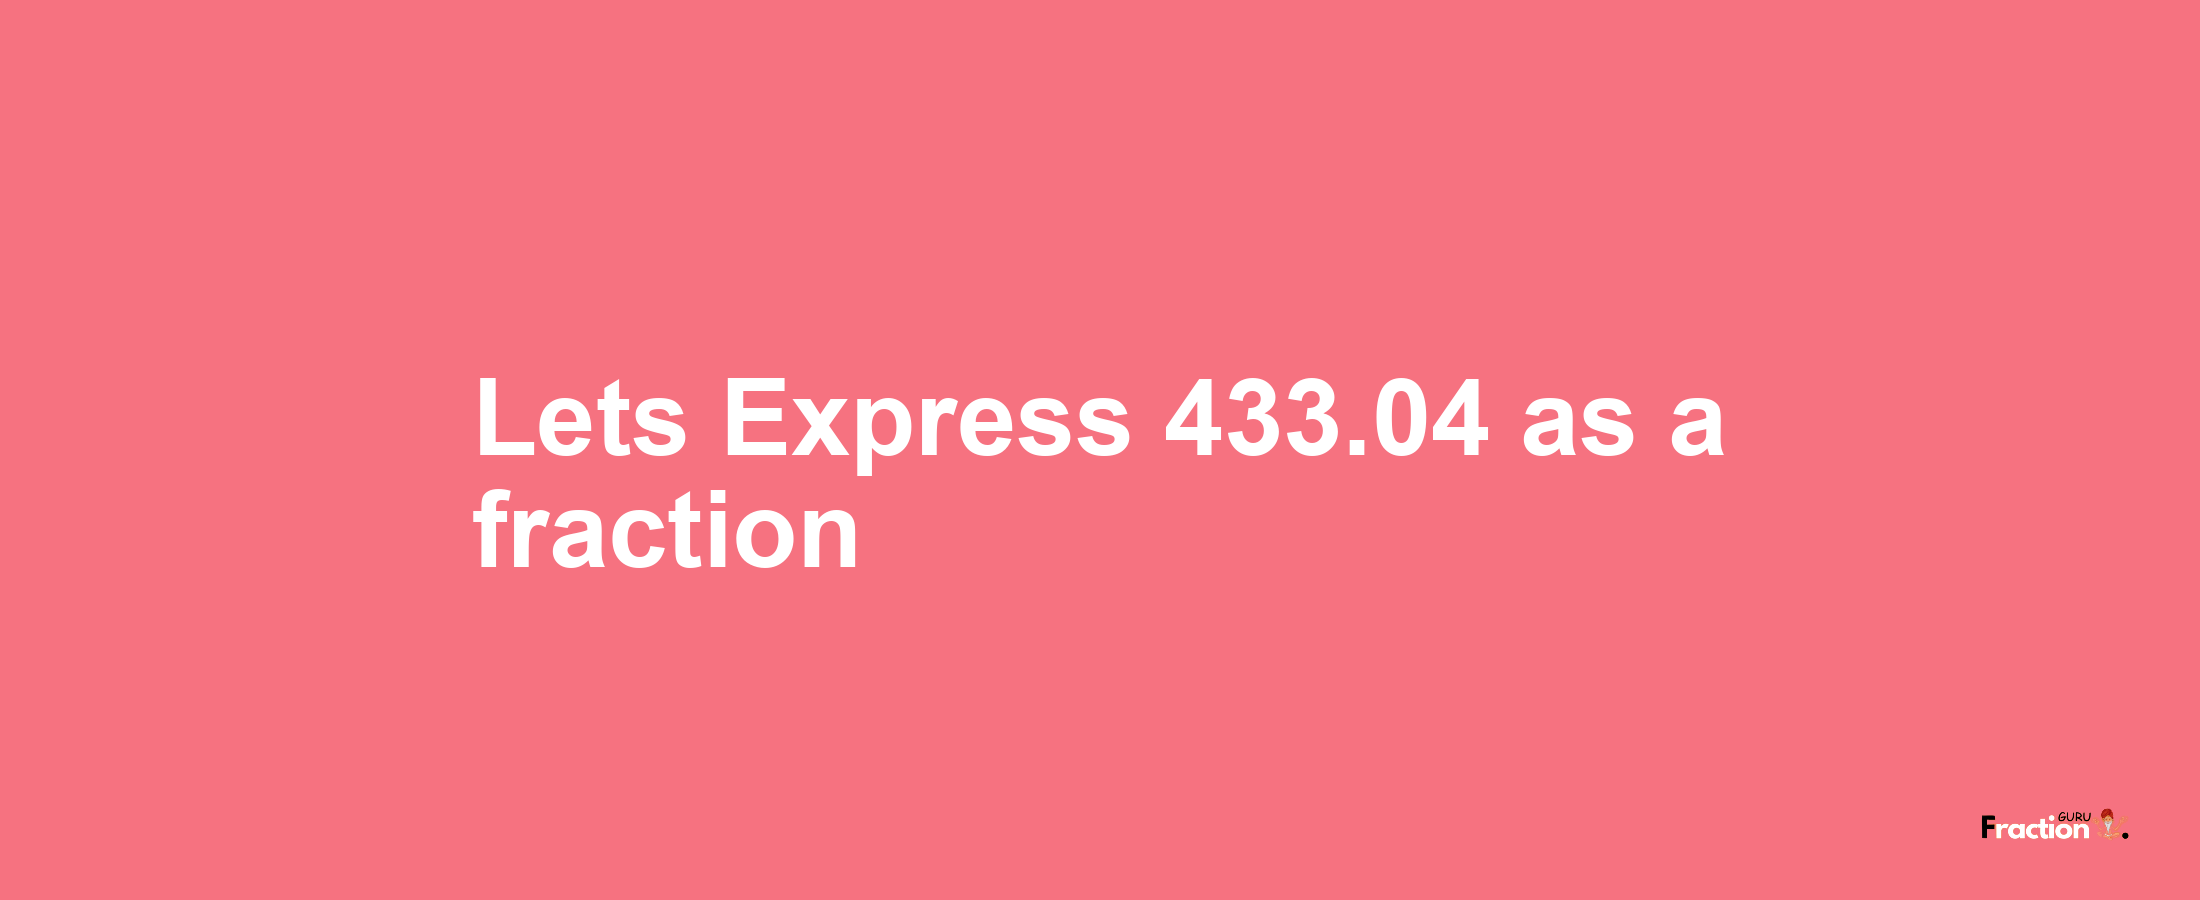 Lets Express 433.04 as afraction